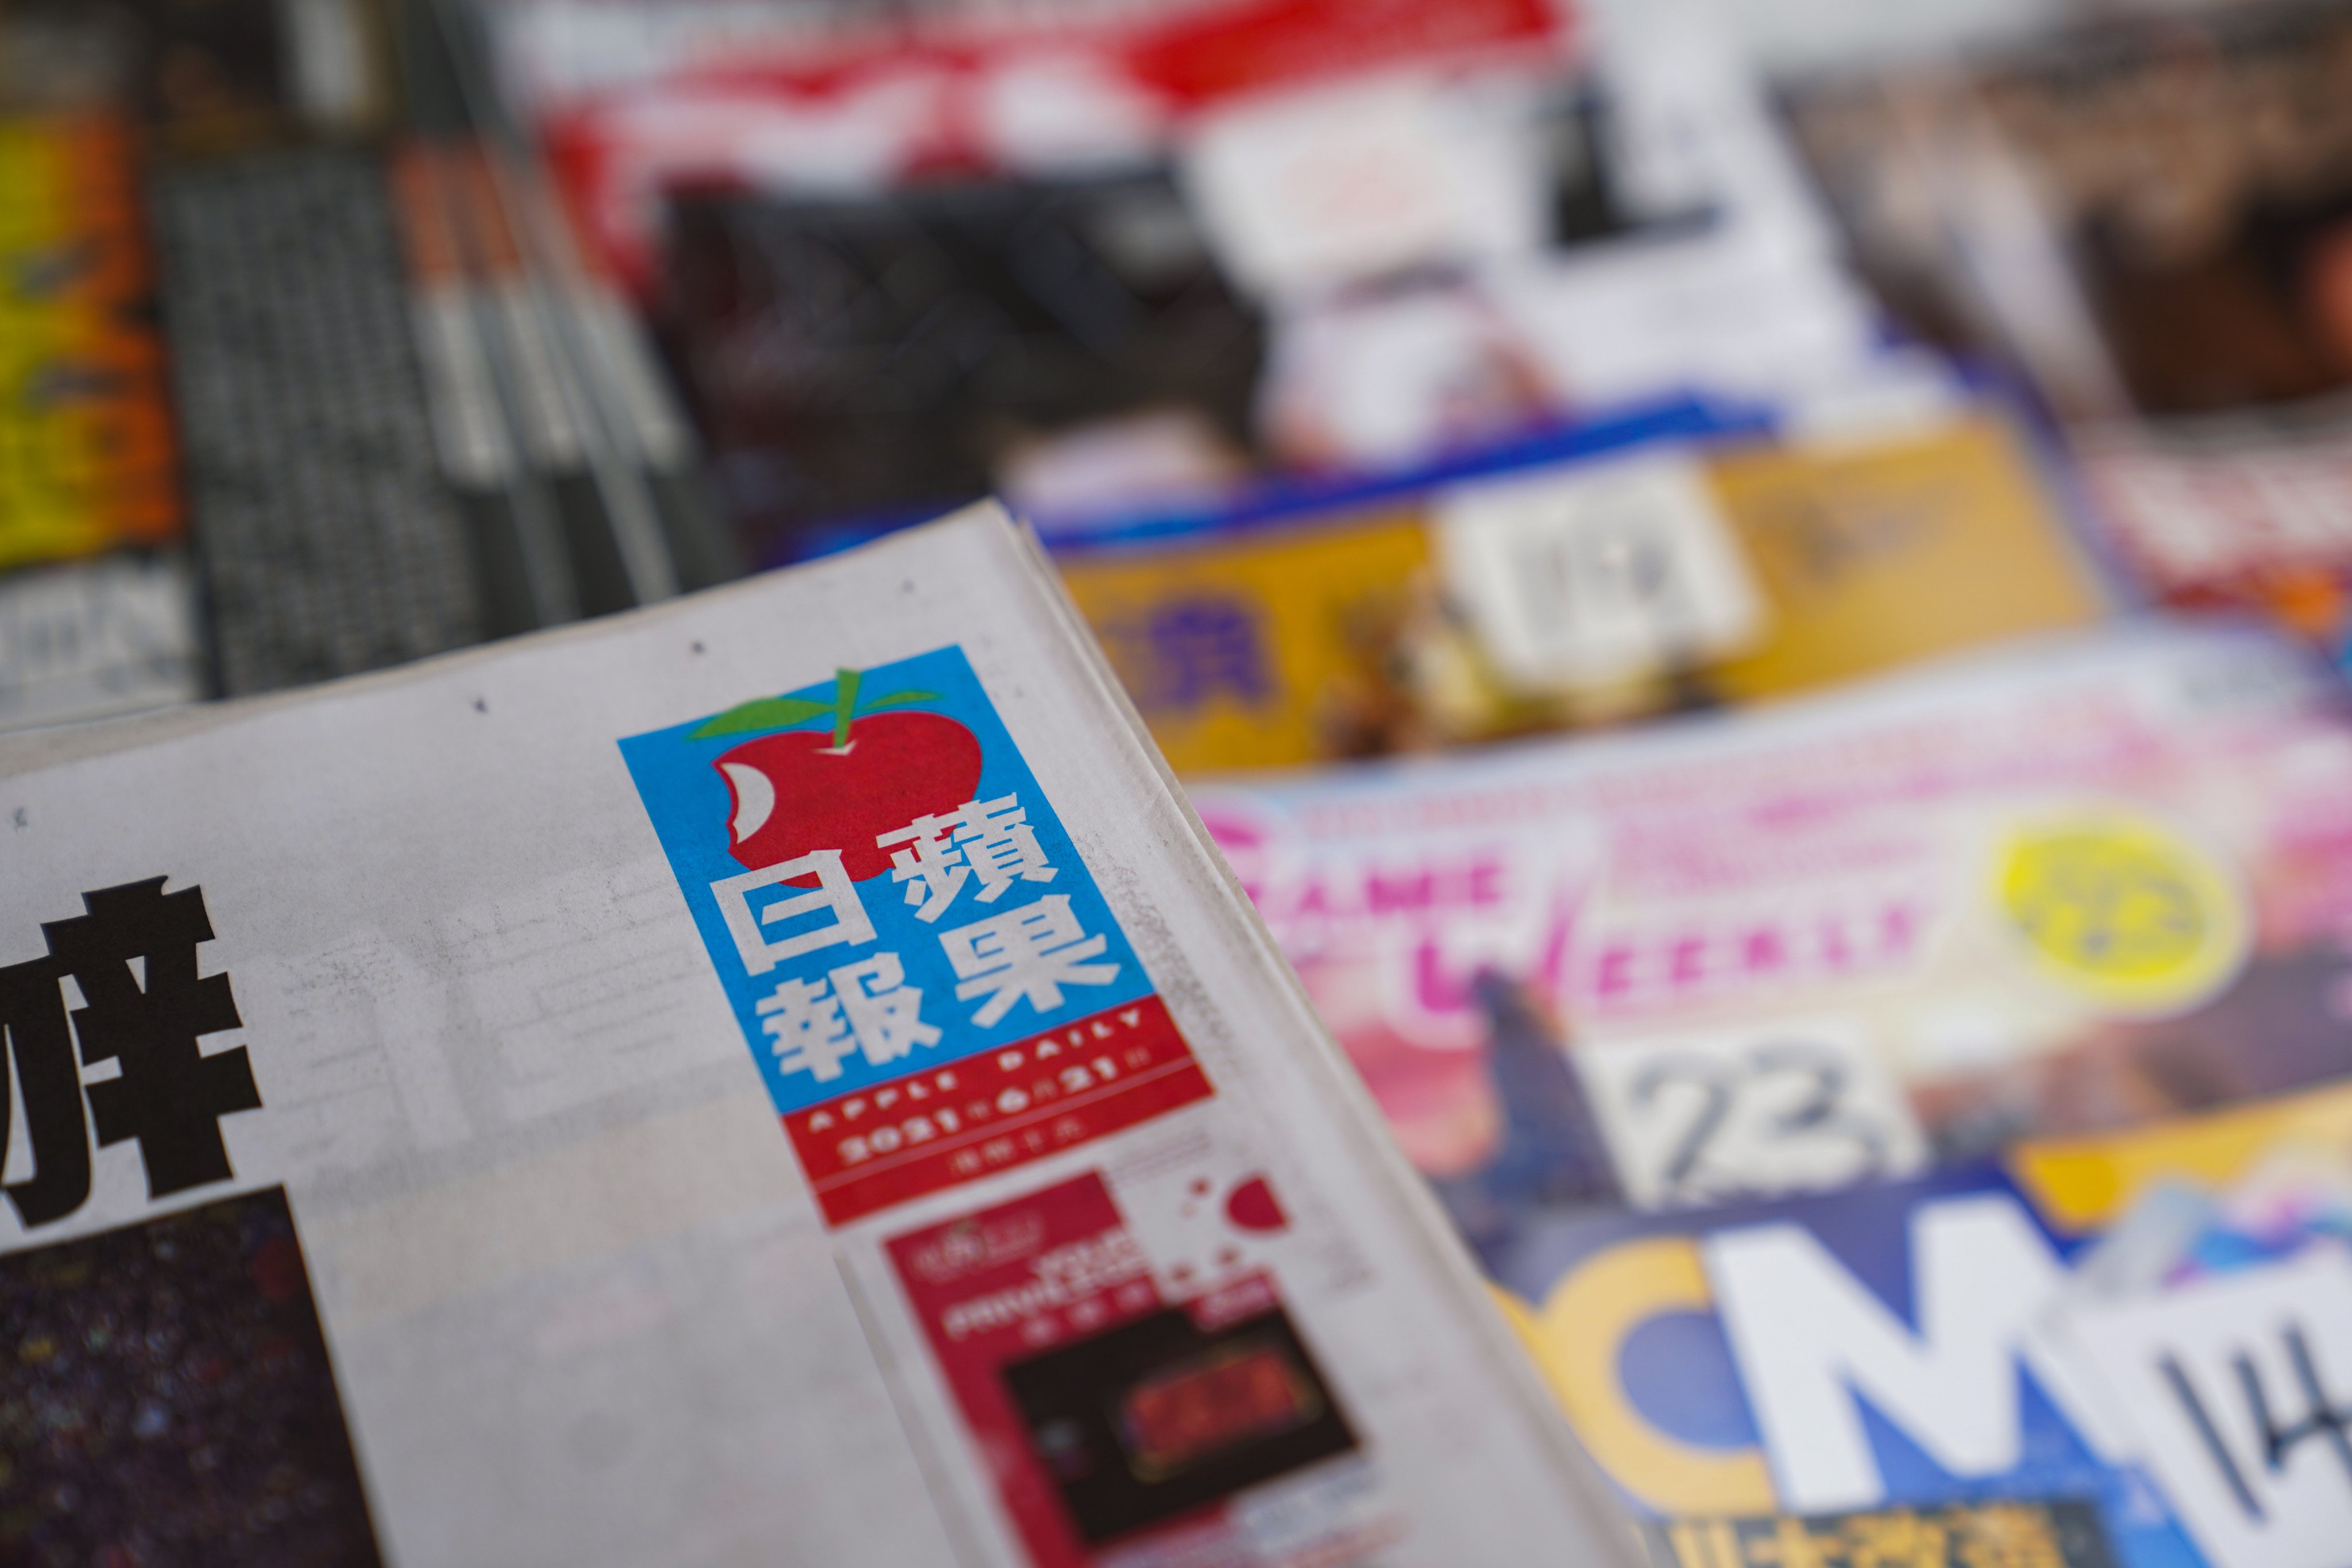 Apple Daily sold in a Mong Kok newsstand in 2021. Prosecutors accused media tycoon Jimmy Lai of using the tabloid to instigate public hatred towards authorities. Photo: Sam Tsang